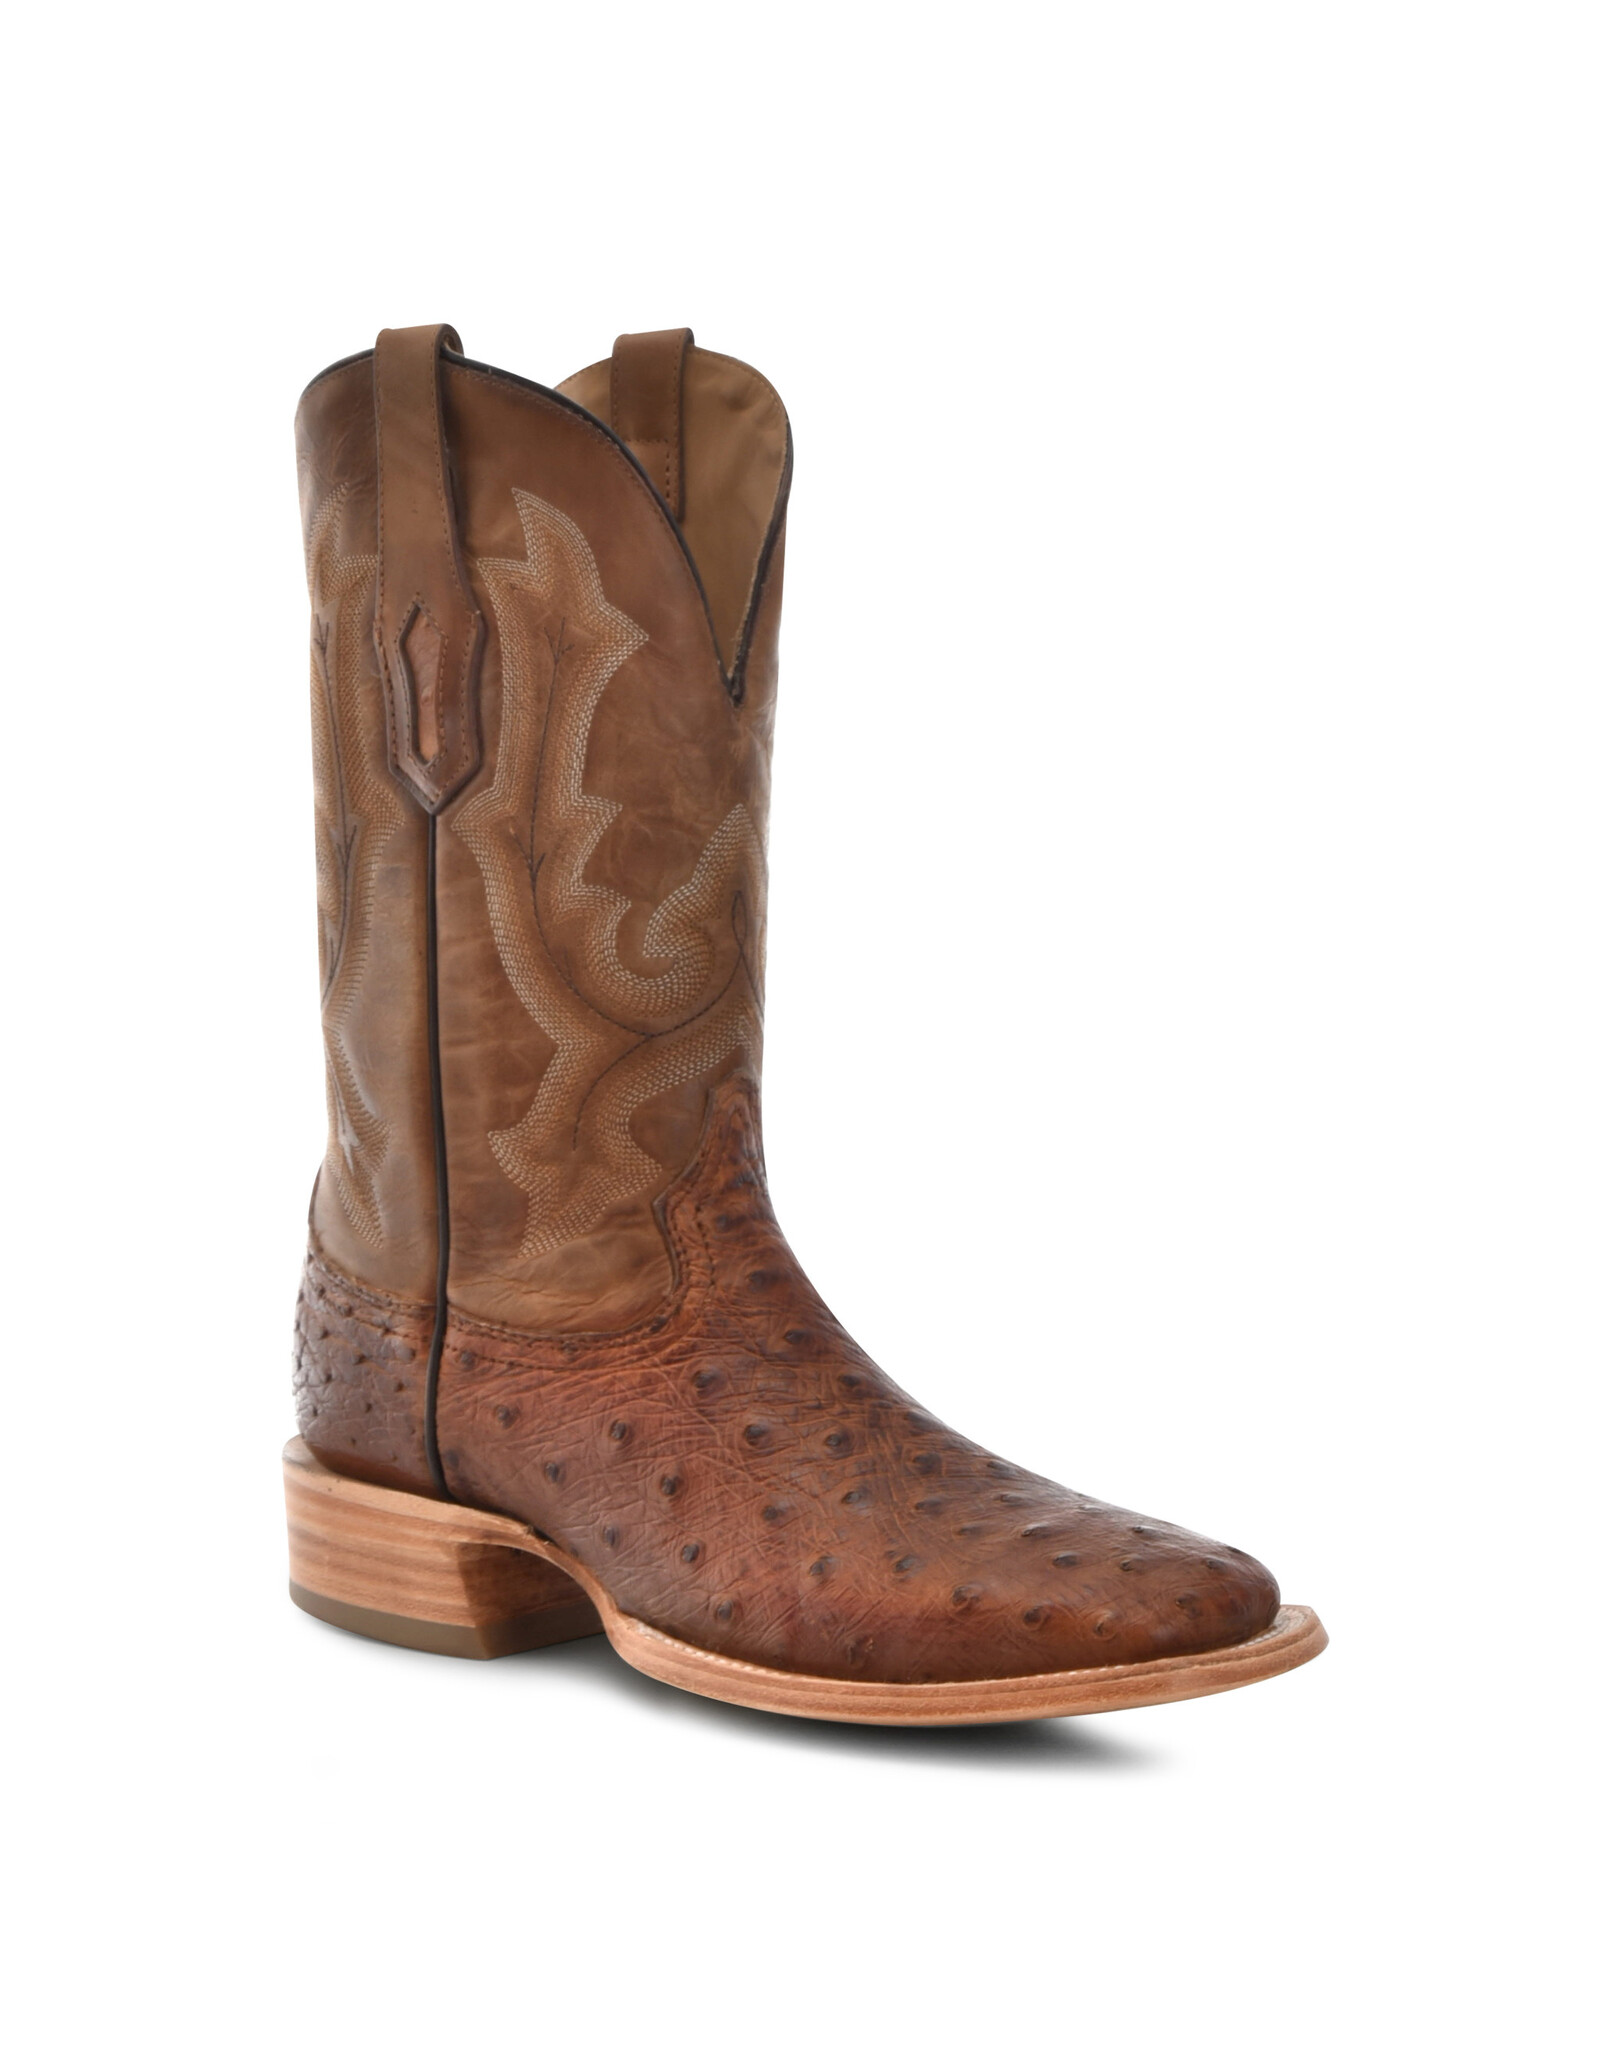 Corral Mens Bronze/Brown Ostrich A4532 Exotic Western Boots